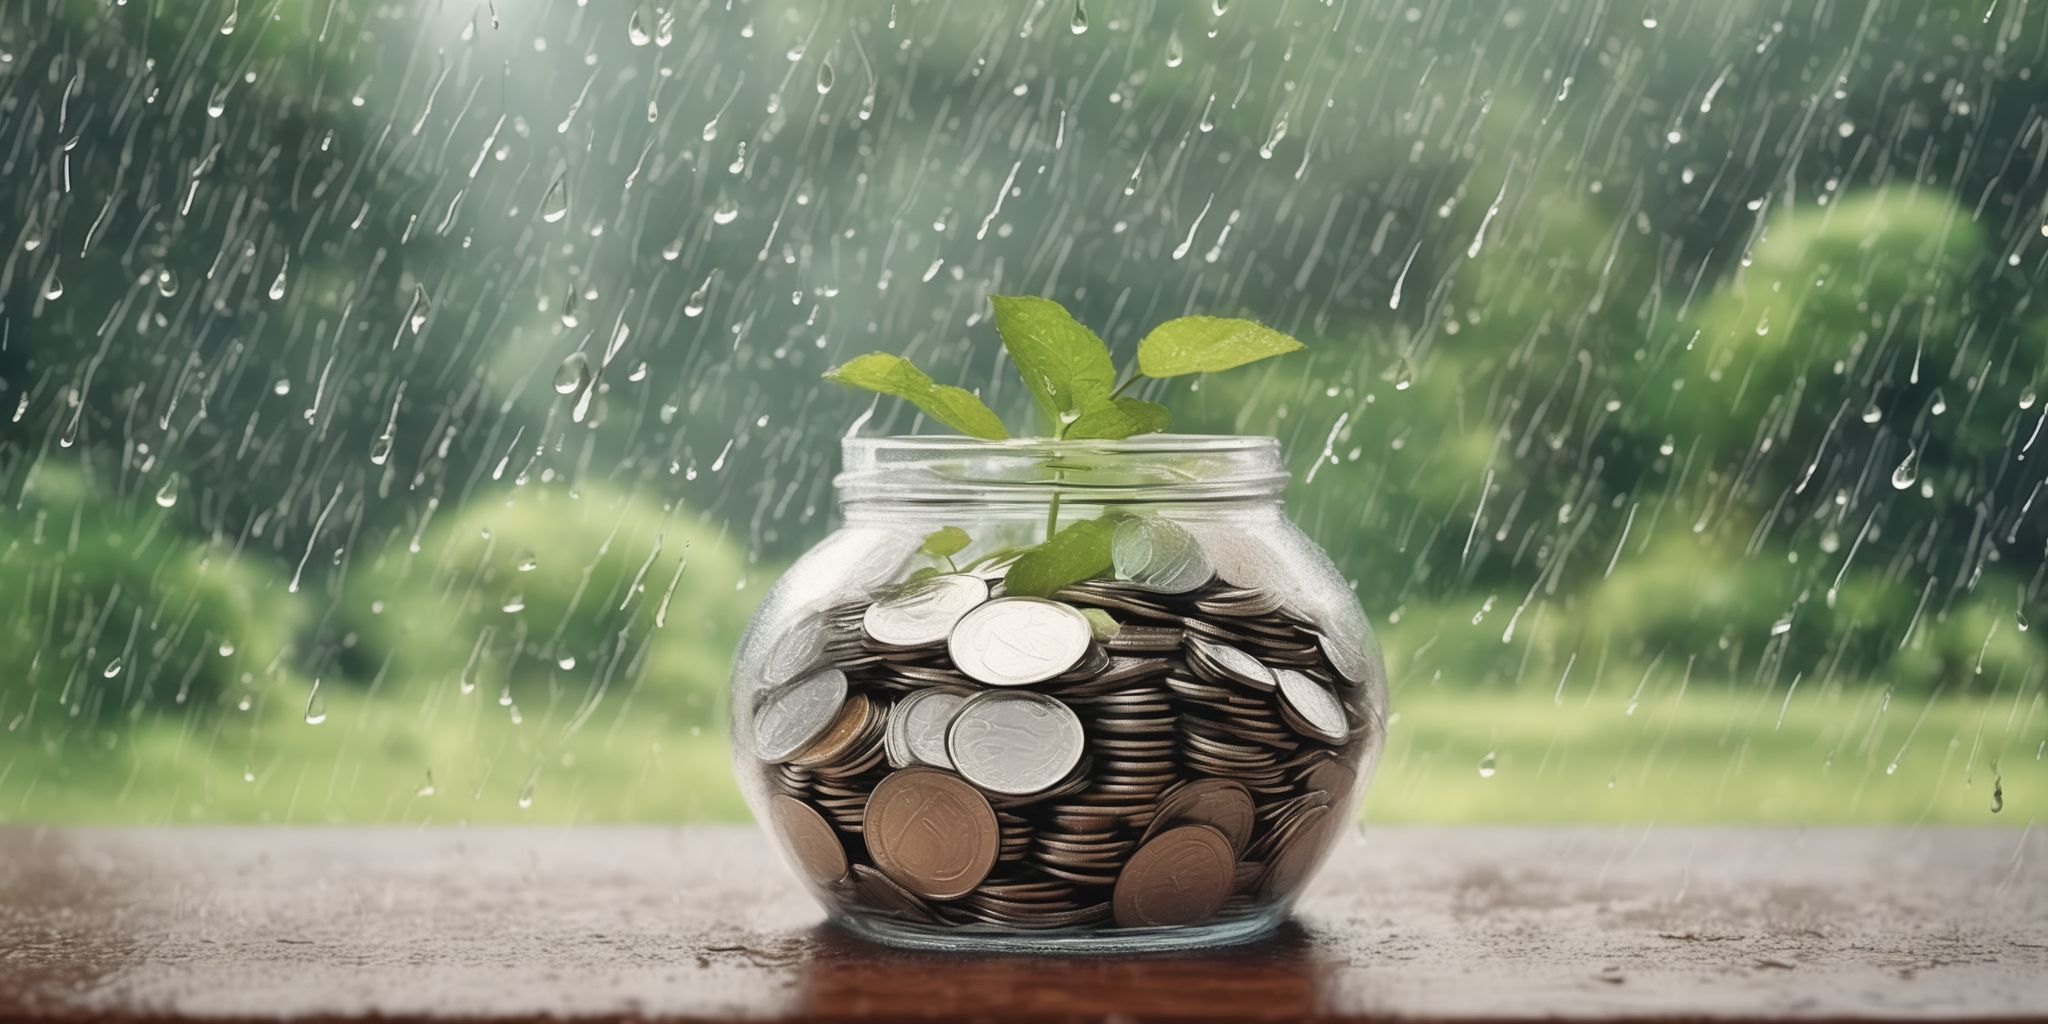 Rainy day fund  in realistic, photographic style